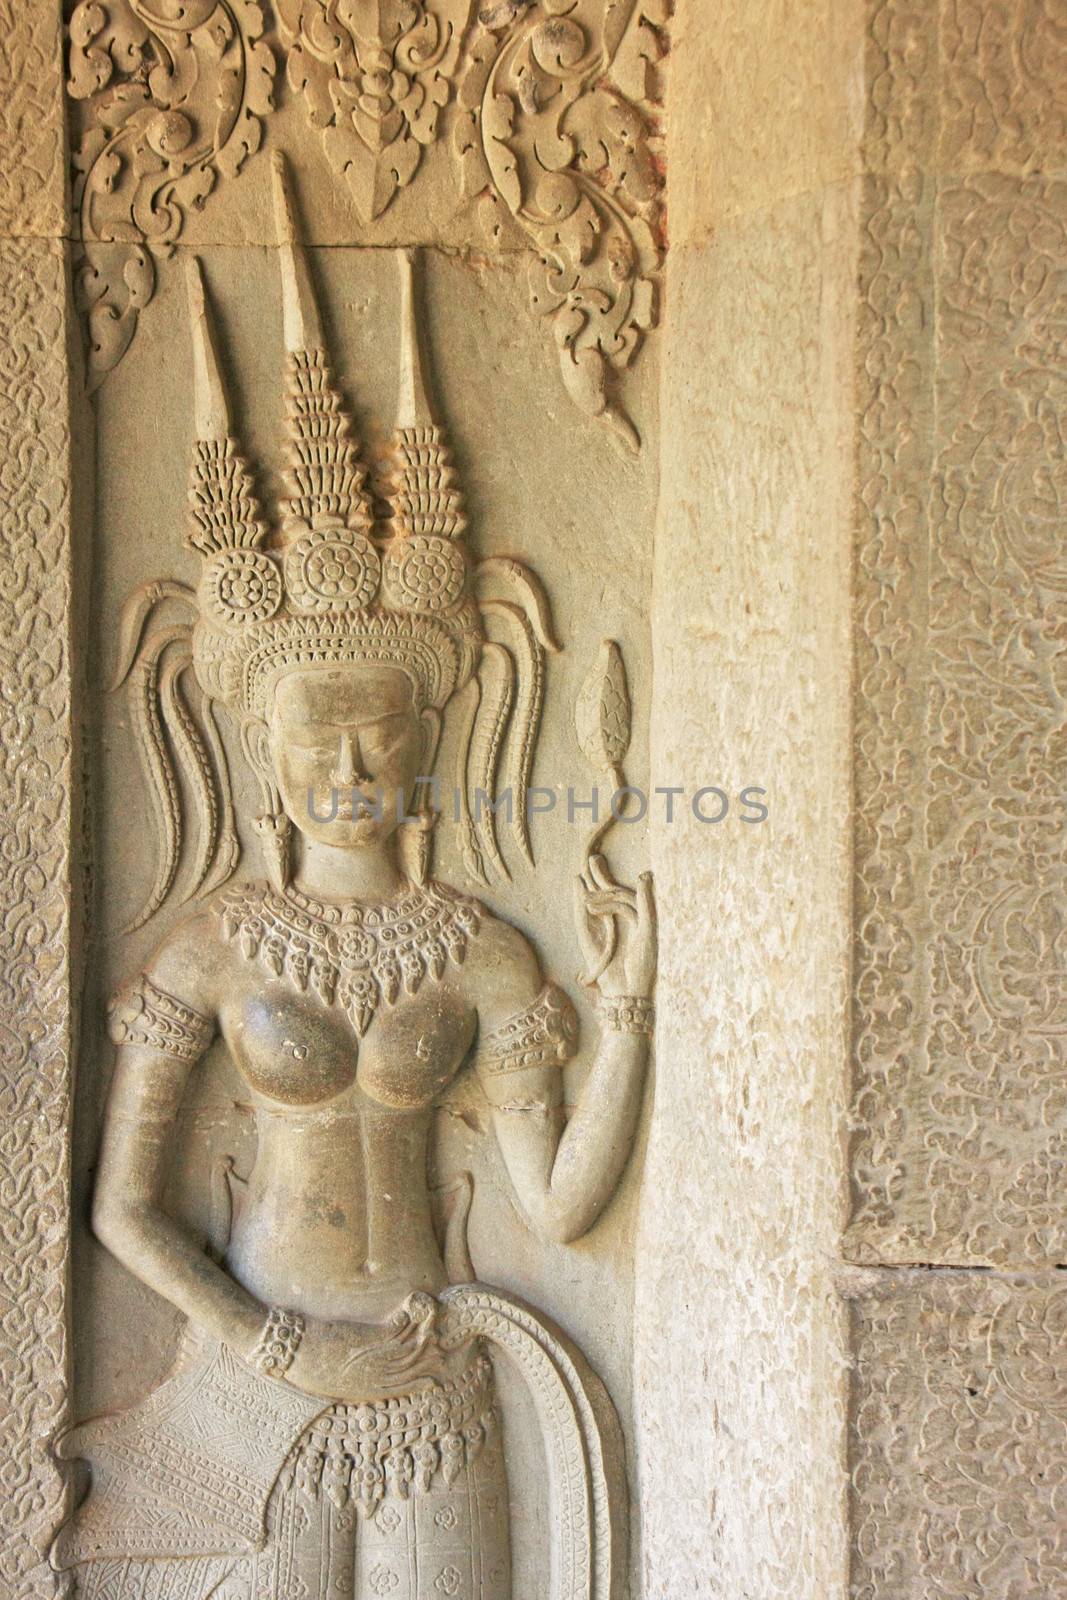 Wall bas-relief of Devata, Angkor Wat temple, Siem Reap, Cambodi by donya_nedomam